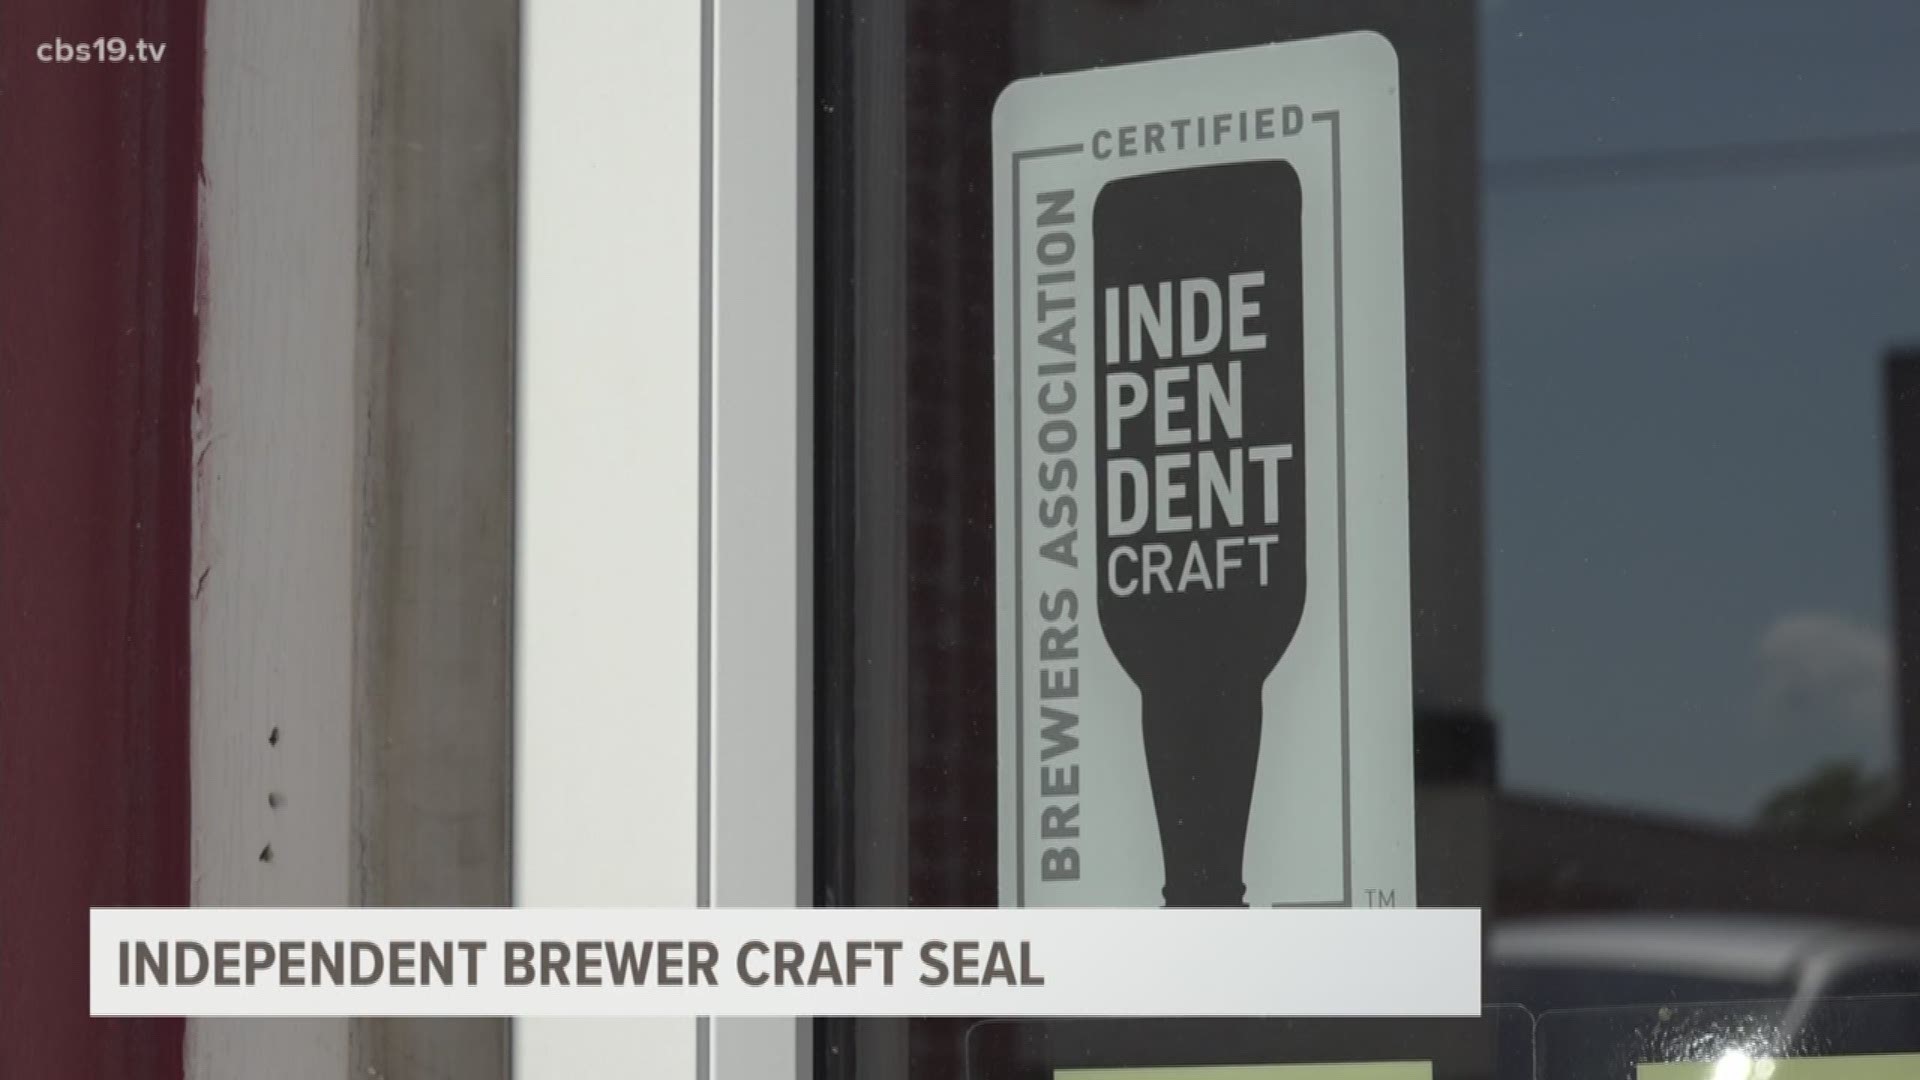 In an effort to educate beer lovers about which beers are independently produced, the Brewers Association has launched a new seal indicating independent craft brewers.